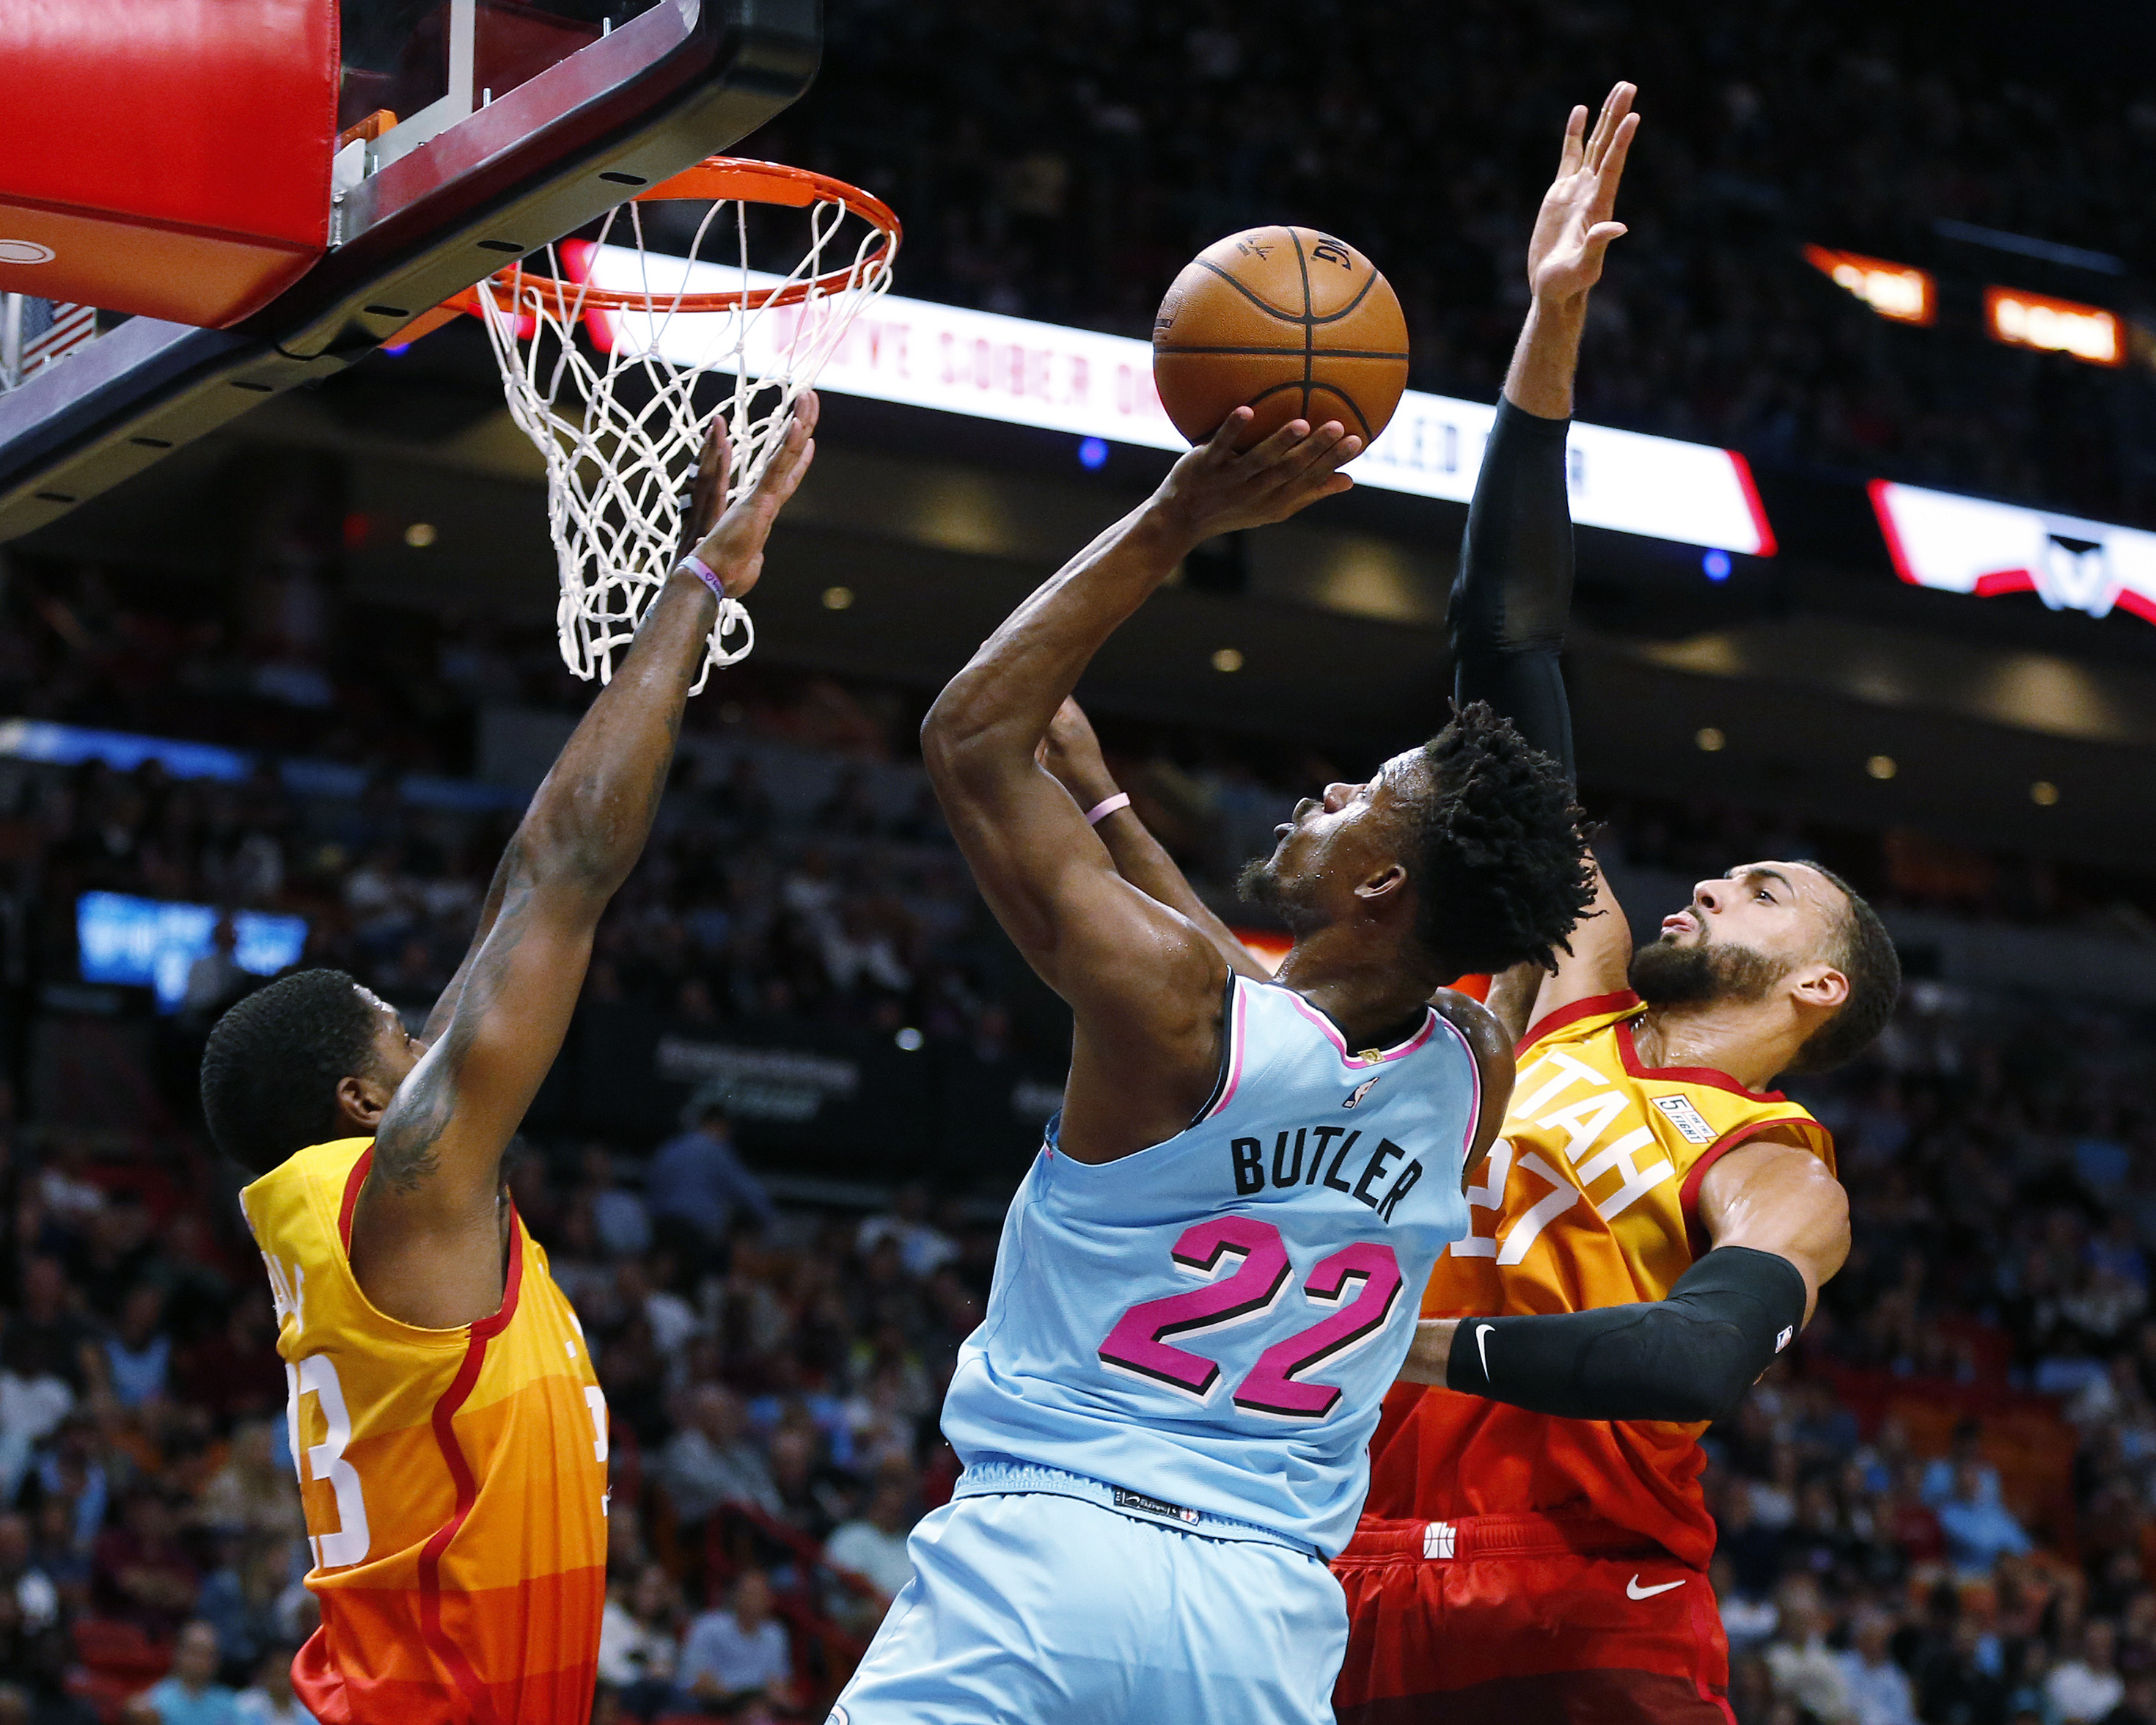 Heat move to 13-1 at home, top Jazz 107-104